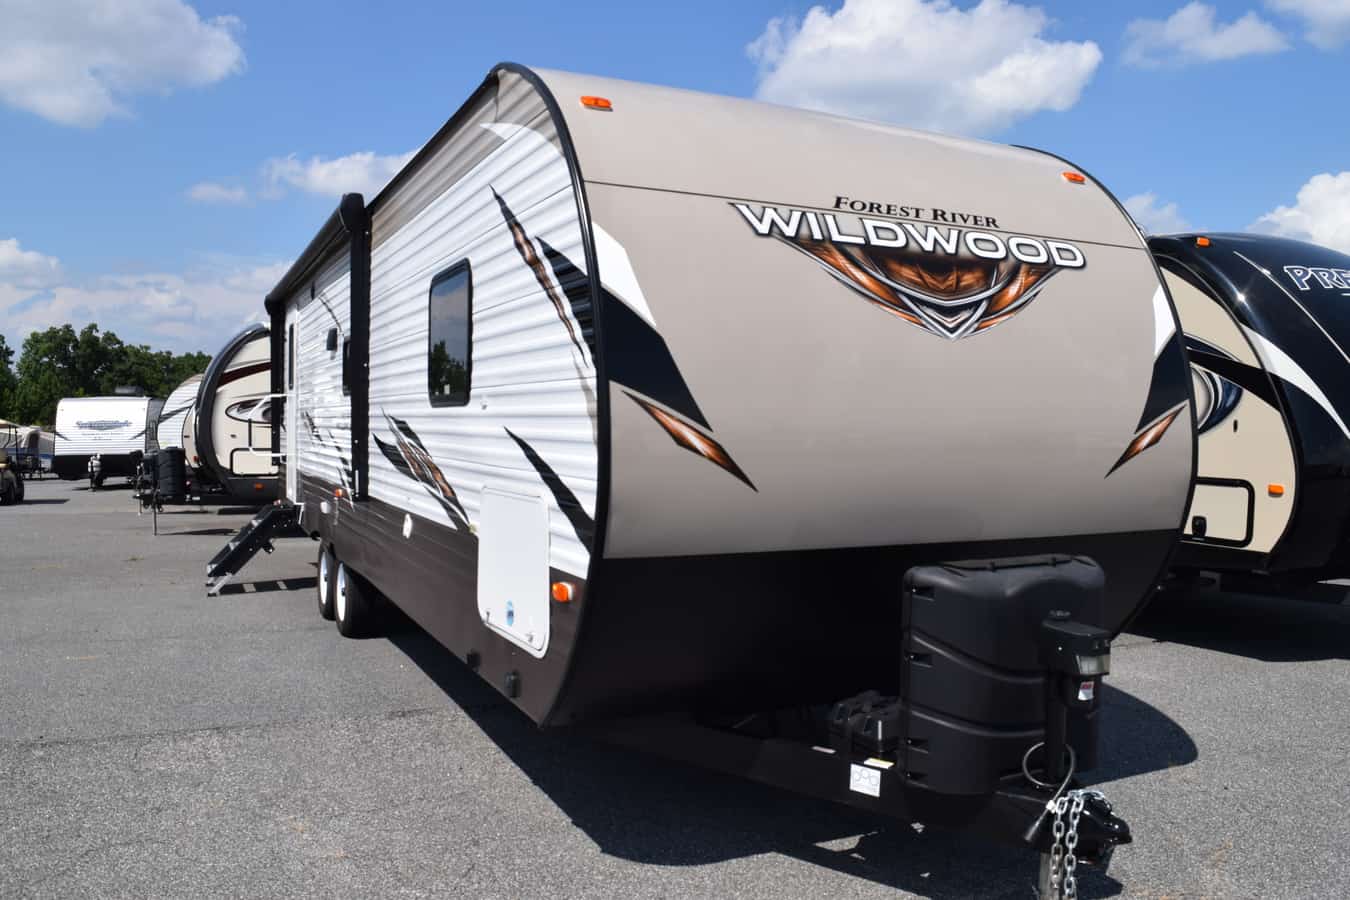 USED 2018 Forest River WILDWOOD 28RLSS